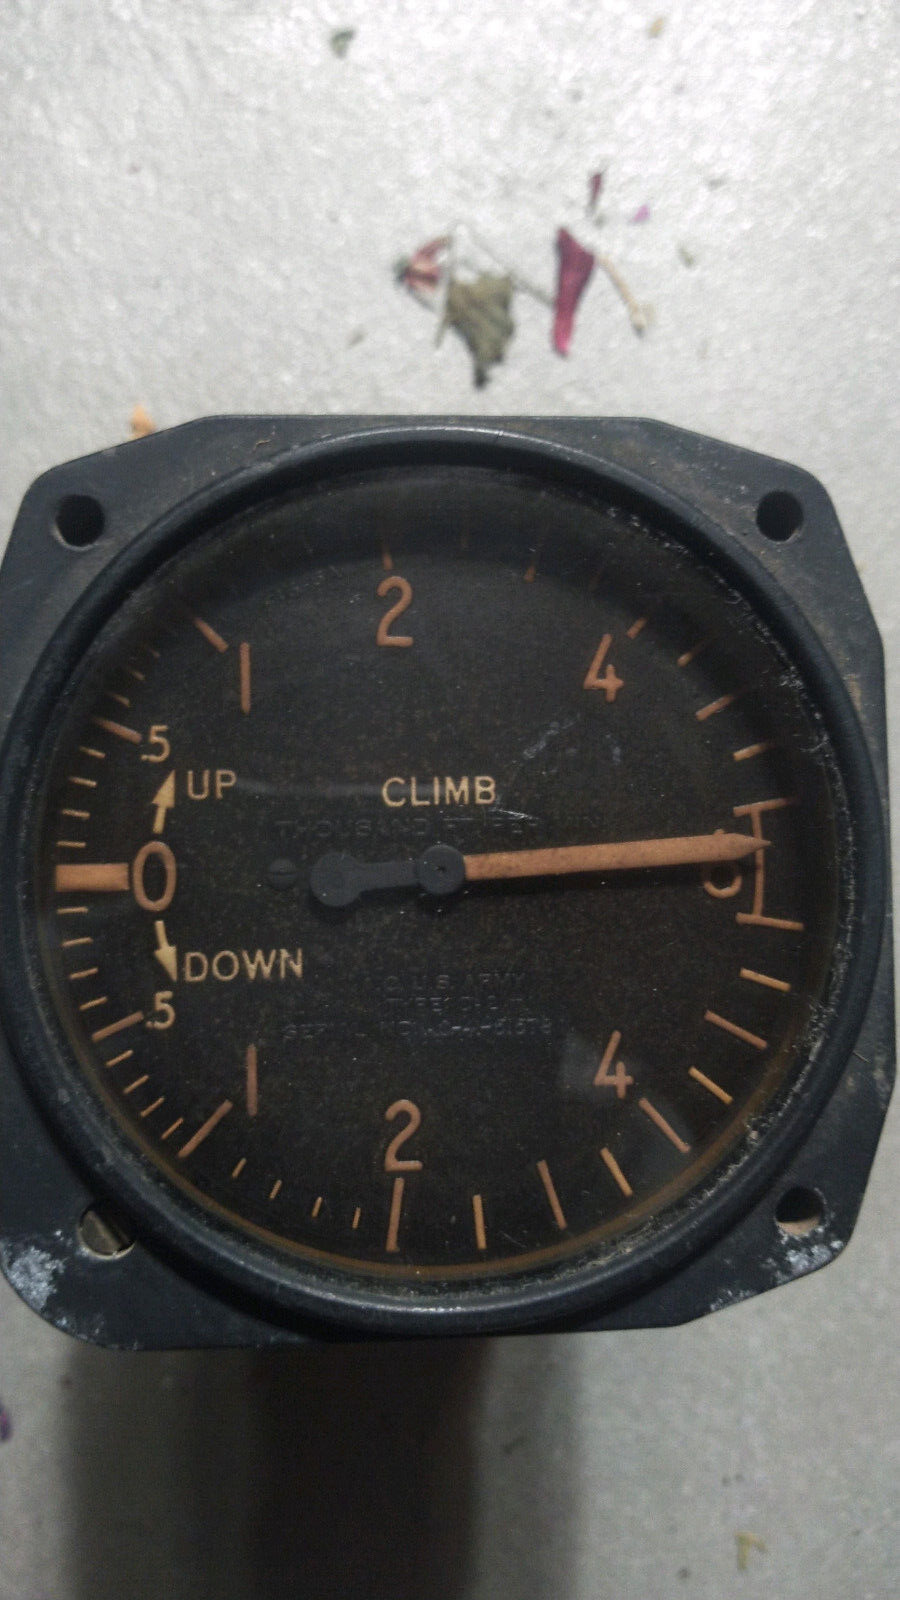 WW2 Climb Rate Guage (USED CONDITION) - These Were Taken From WW2 Aircraft